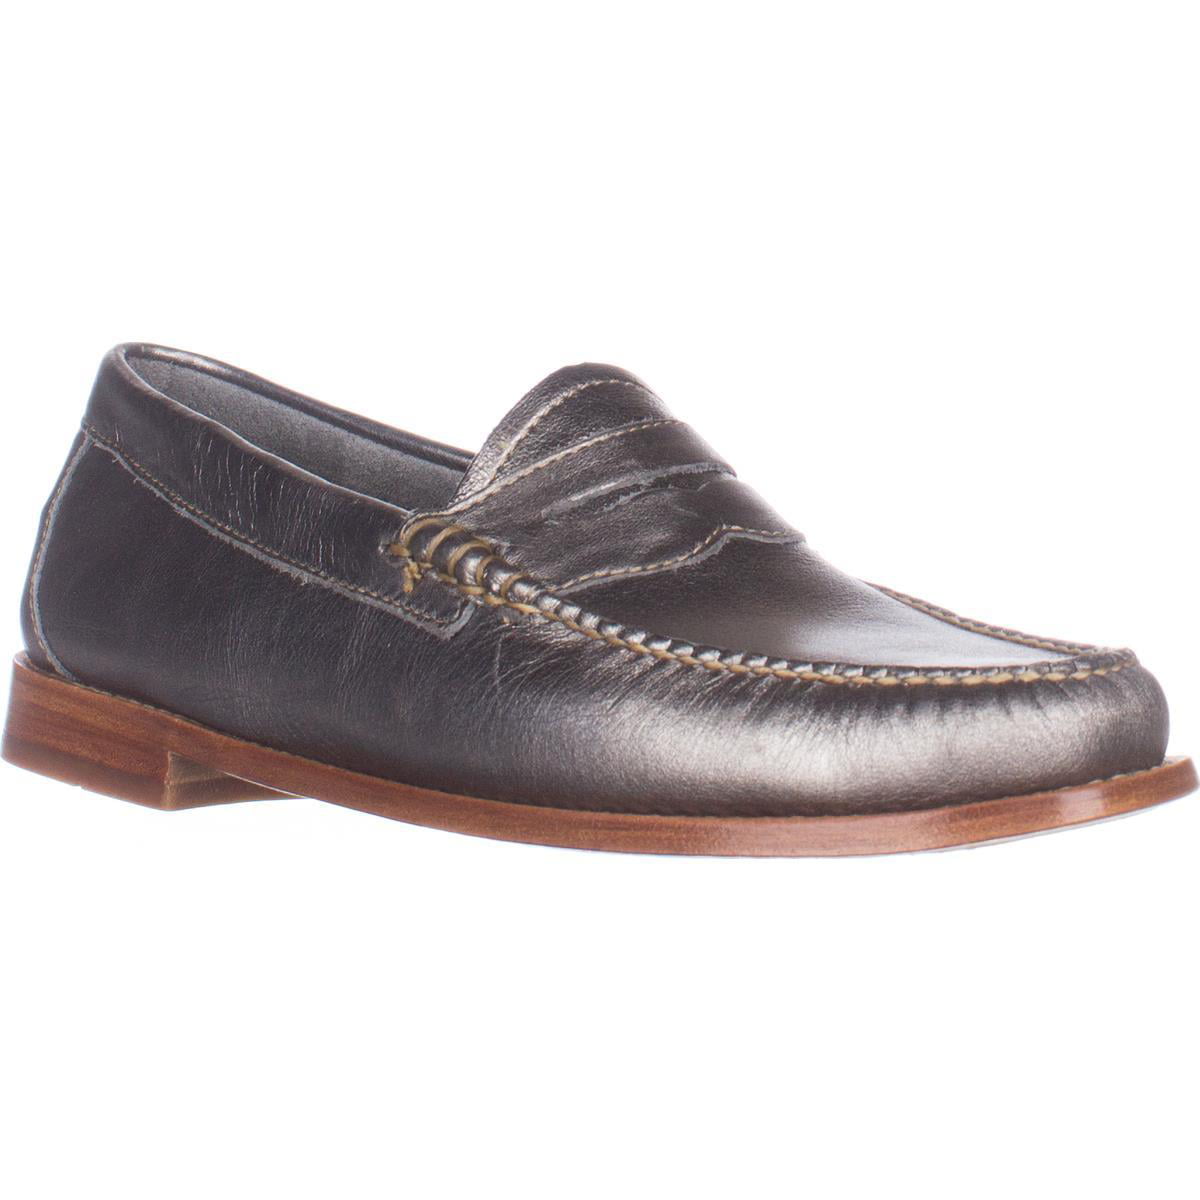 G.H. Bass - Womens Weejuns G.H. Bass & Co. Whitney Penny Loafers ...